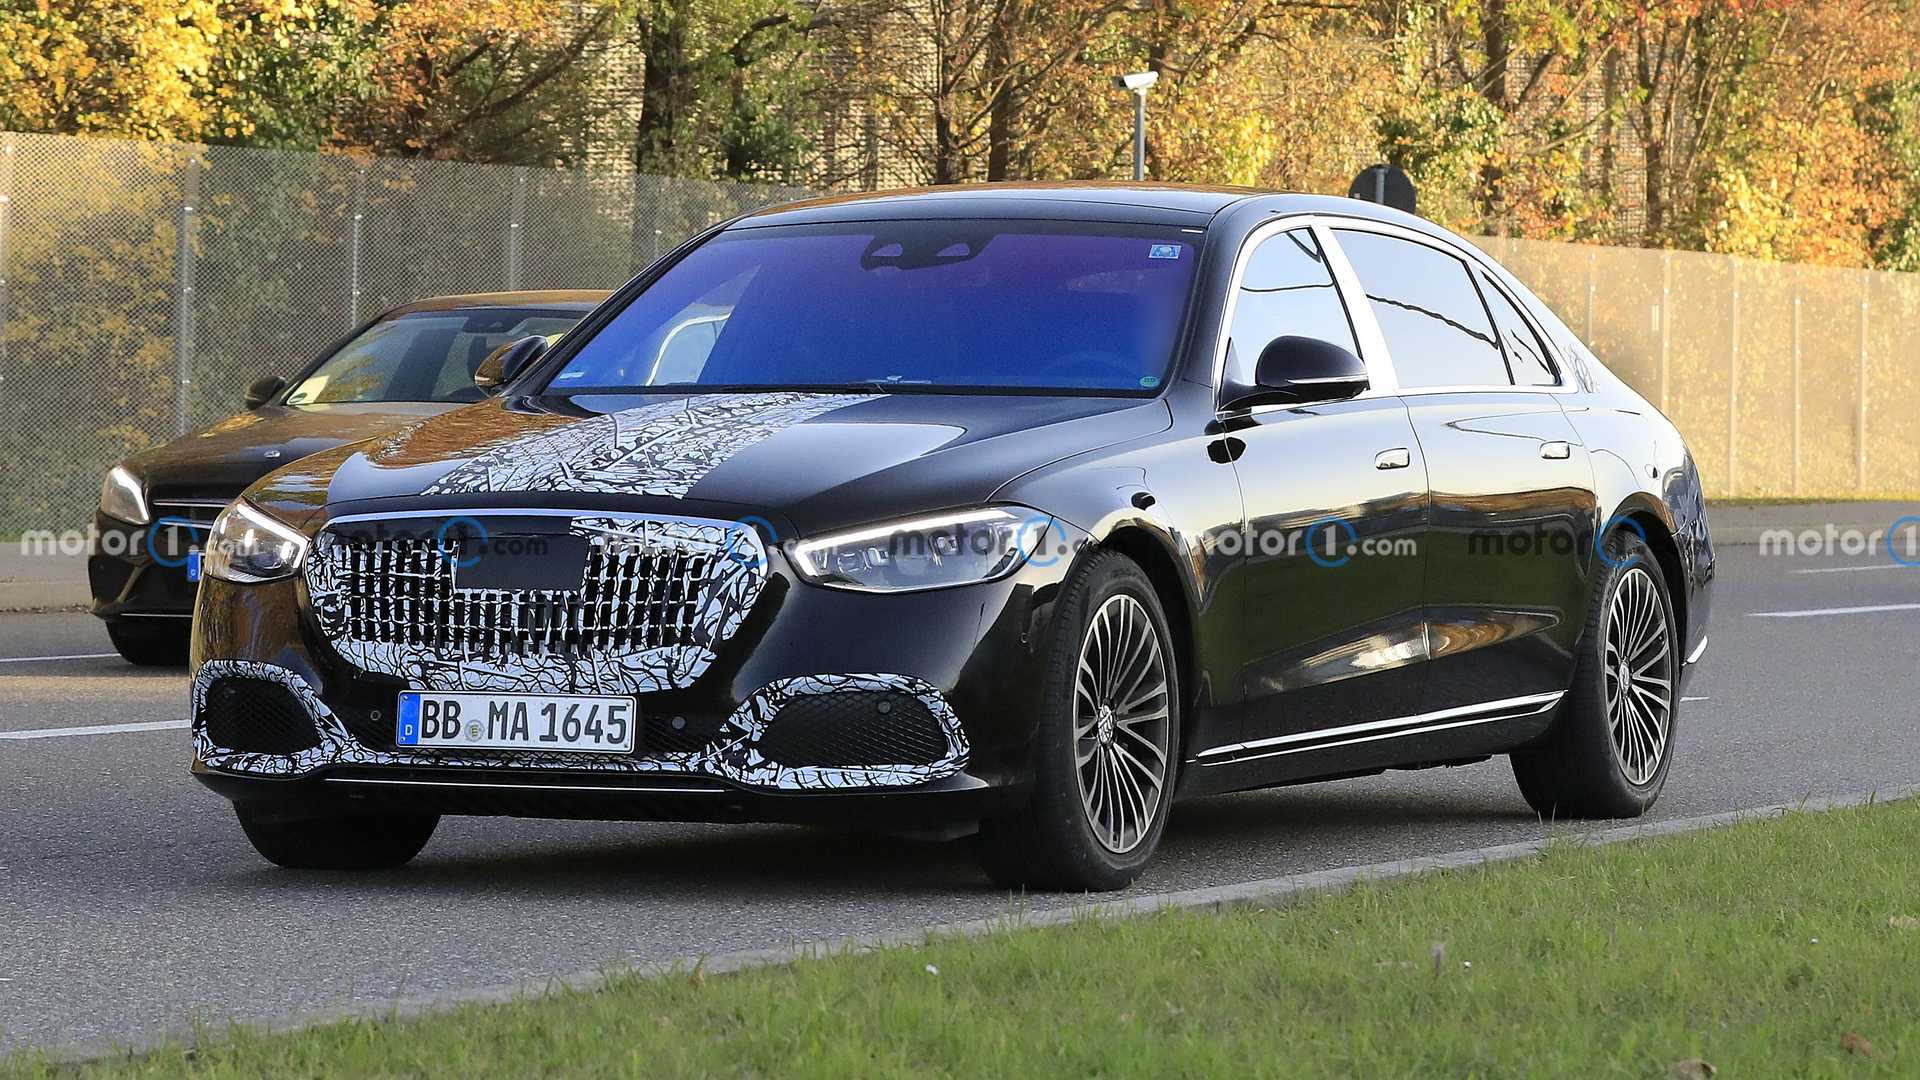 Mercedes Maybach S Class Spied Looking Snazzy With Little Camo